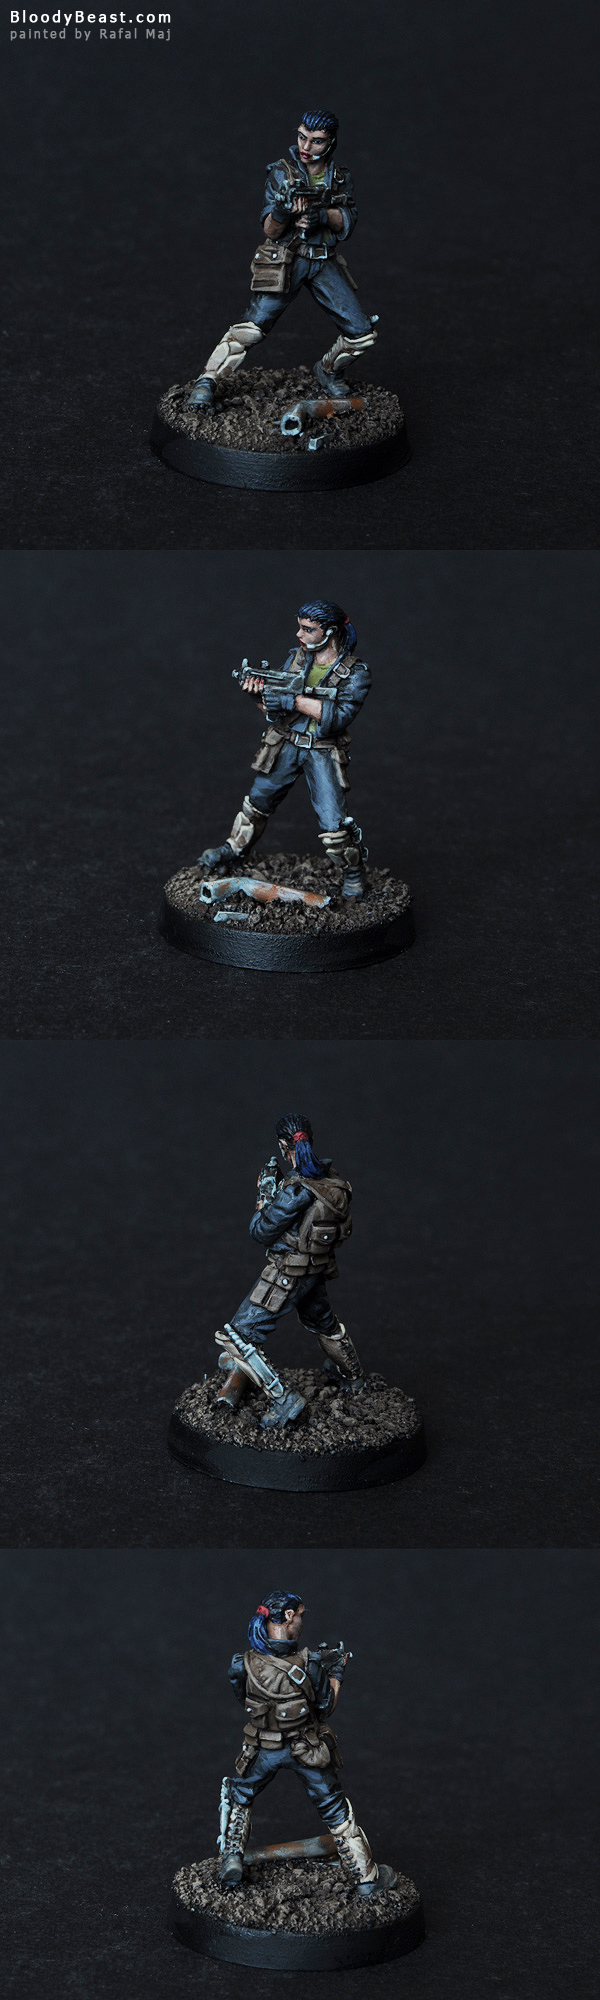 Scout painted by Rafal Maj (BloodyBeast.com)